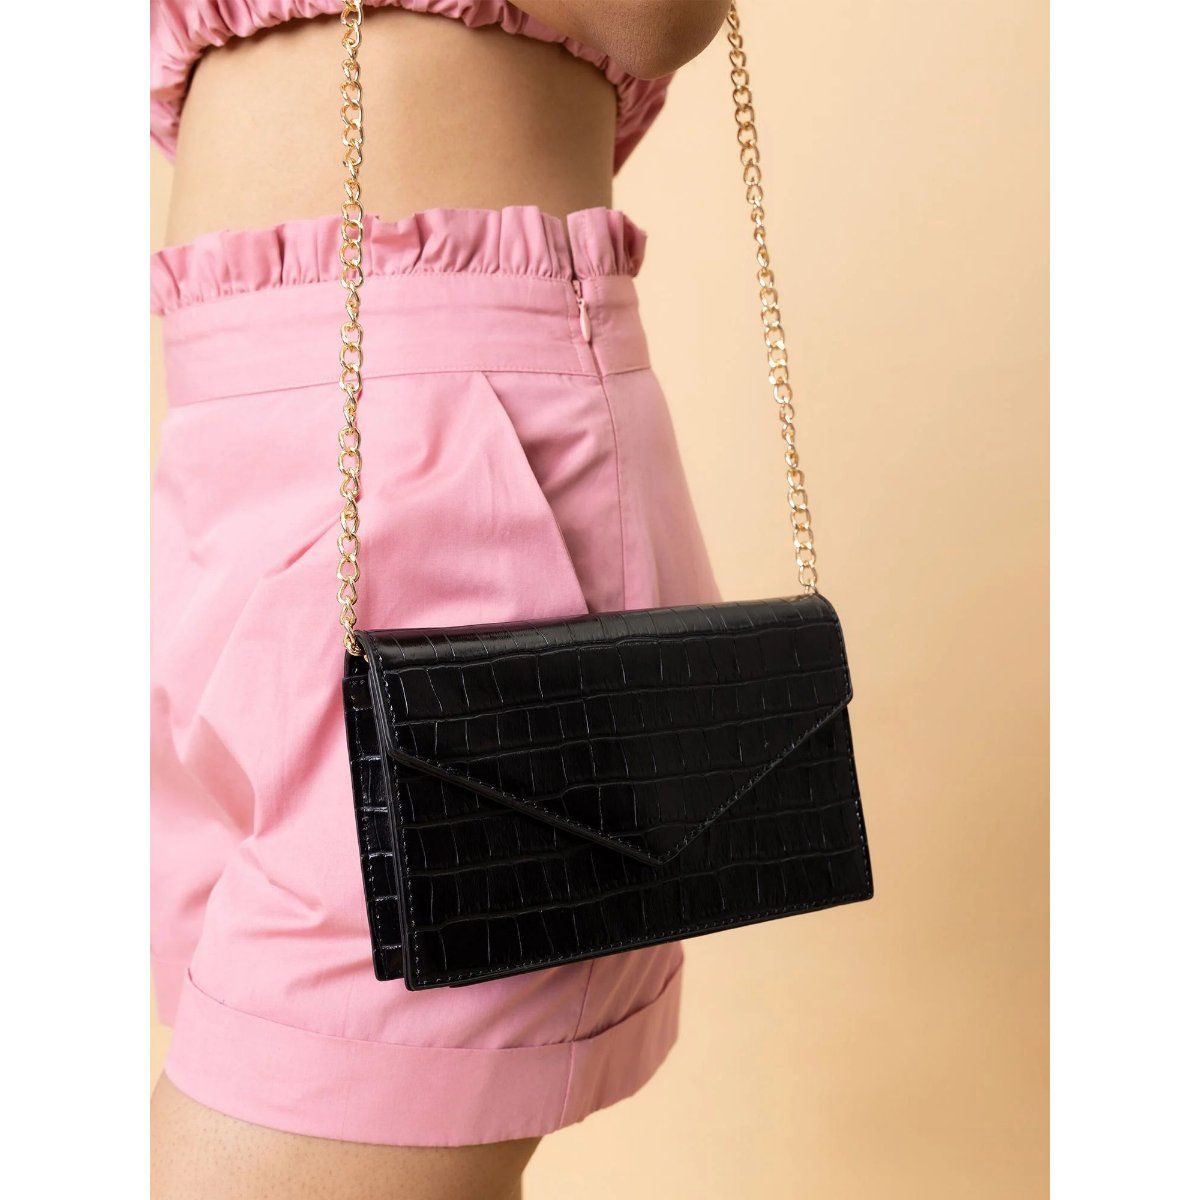 MIXT by Nykaa Fashion Pink Woven Textured Handbag (Pink) At Nykaa, Best Beauty Products Online